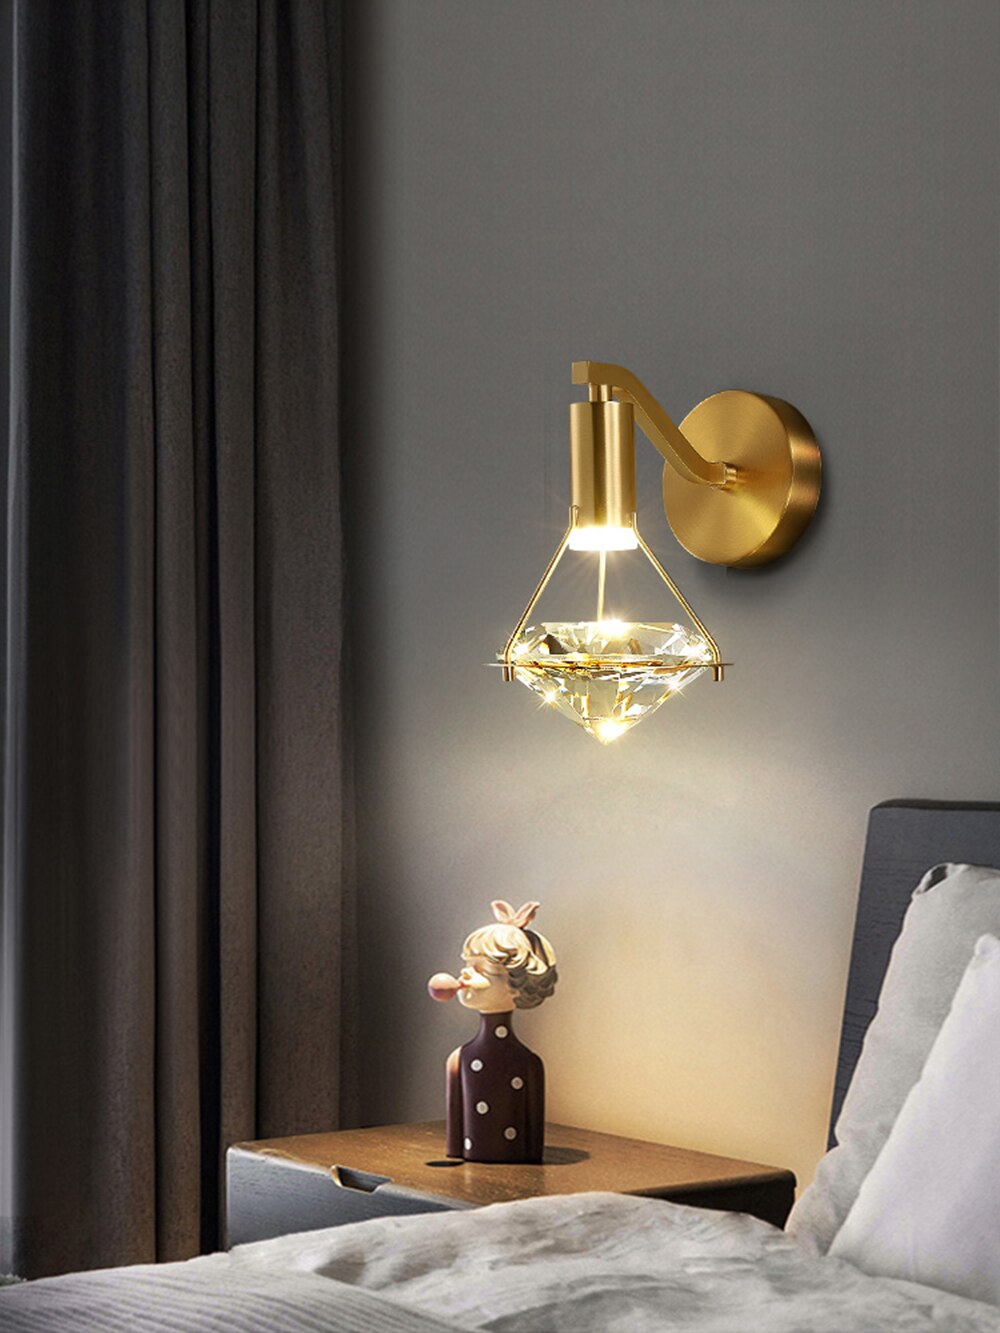 LED-Wall-Light-Modern-Bedroom-Bedside-Wall-Lamp-Stair-Corridor-Decoration-Lighting-Lamp-Copper-And-C-1005004059985131-1